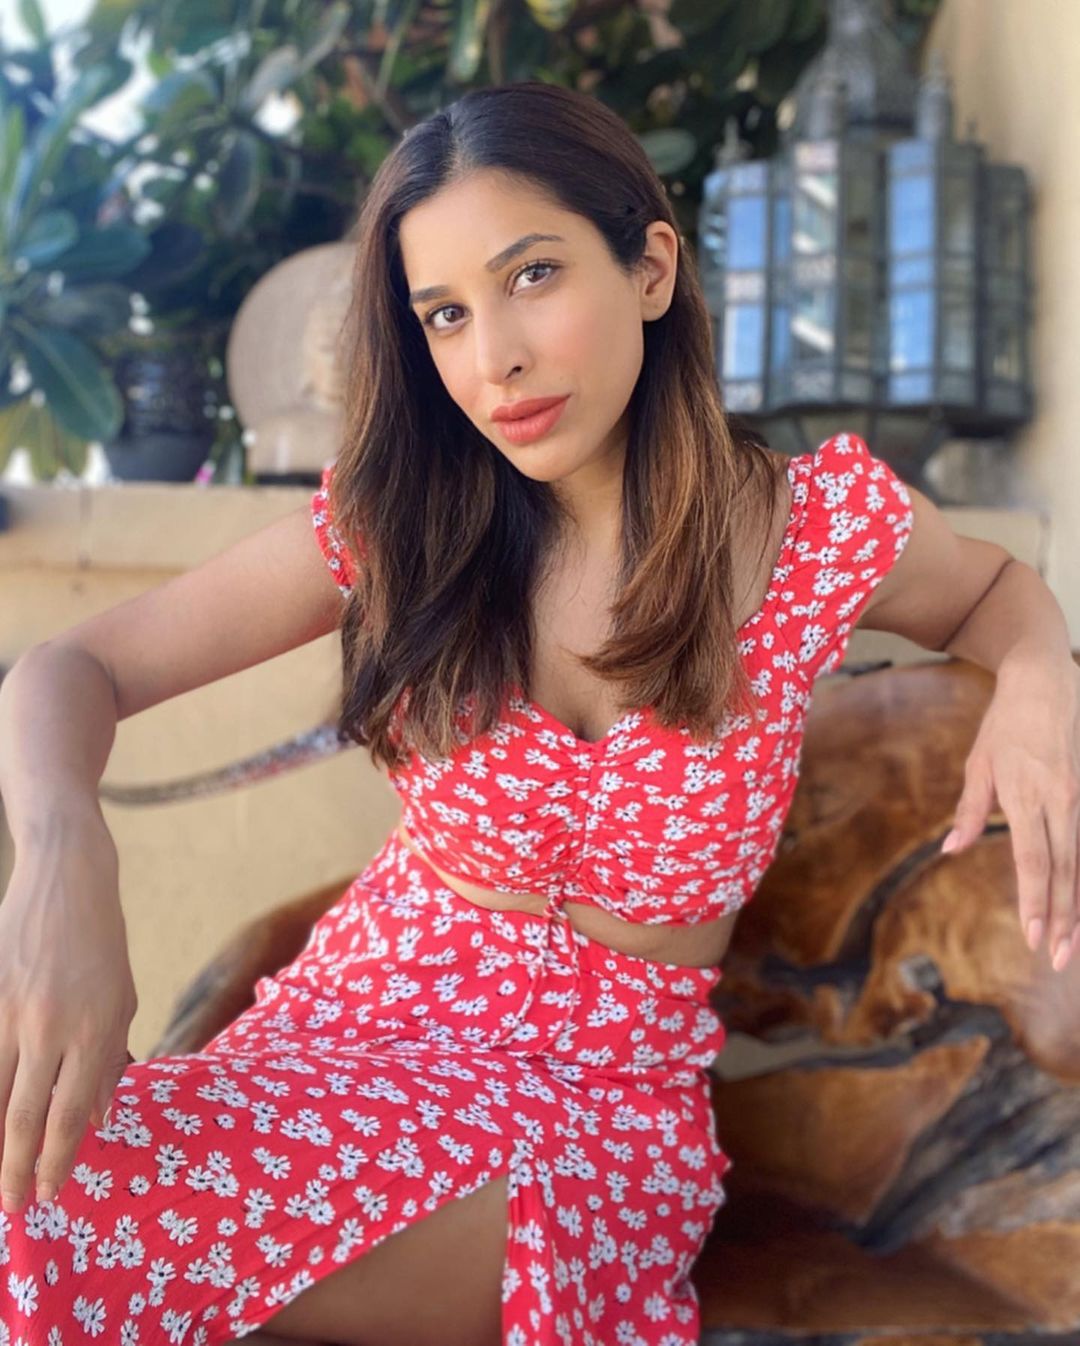  Sophie Choudry looks sexy in the floral crop top and matching skirt. (Image: Instagram)